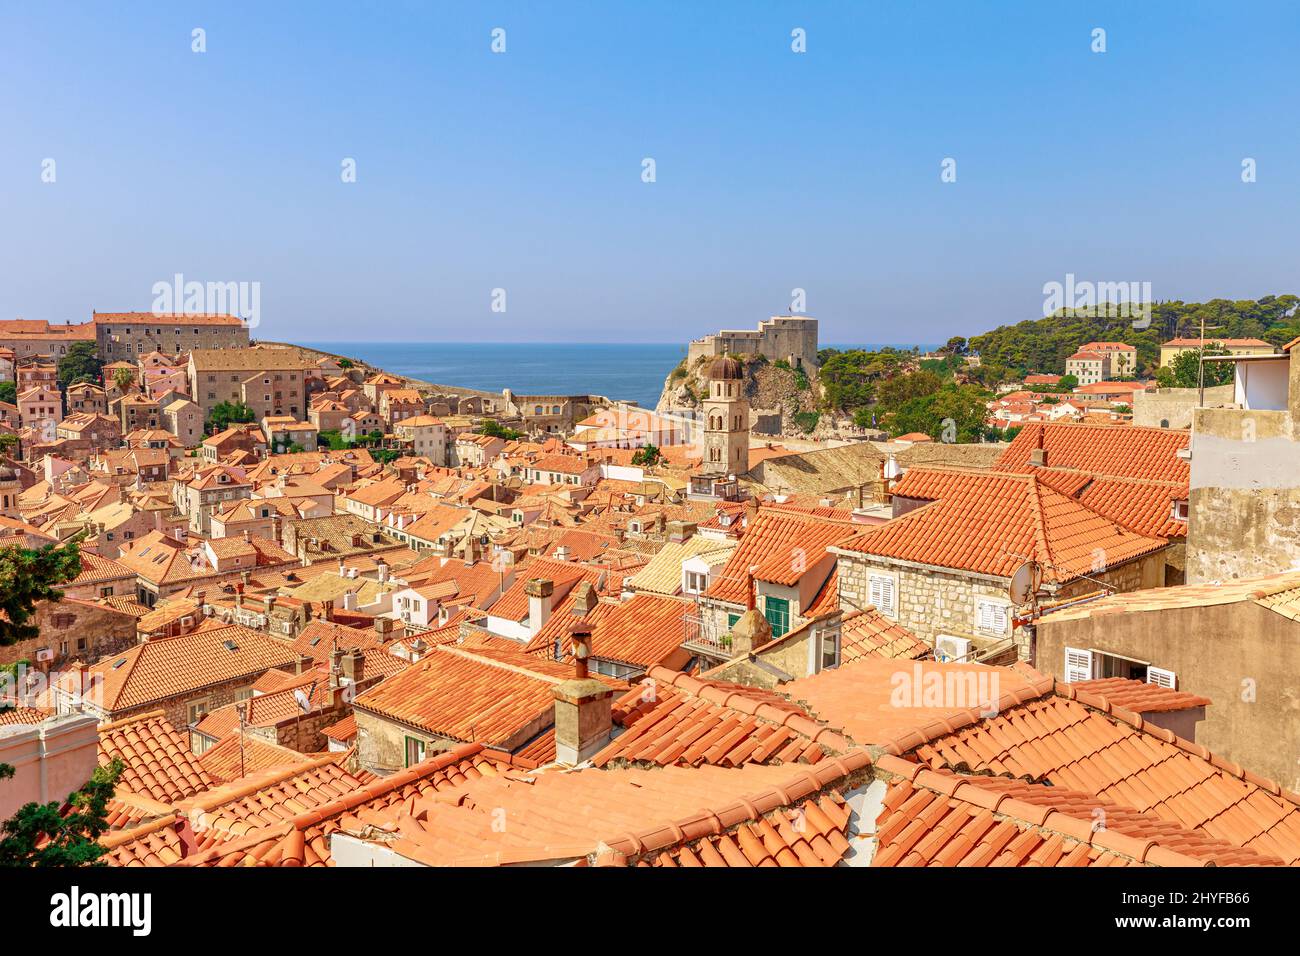 Aerial view on Dubrovnik walls in Croatia. View of Fort Lovrijenac fortress and church Crkva sv. Vlaho Saint Biagio of Dubrovnik UNESCO Venetian town Stock Photo